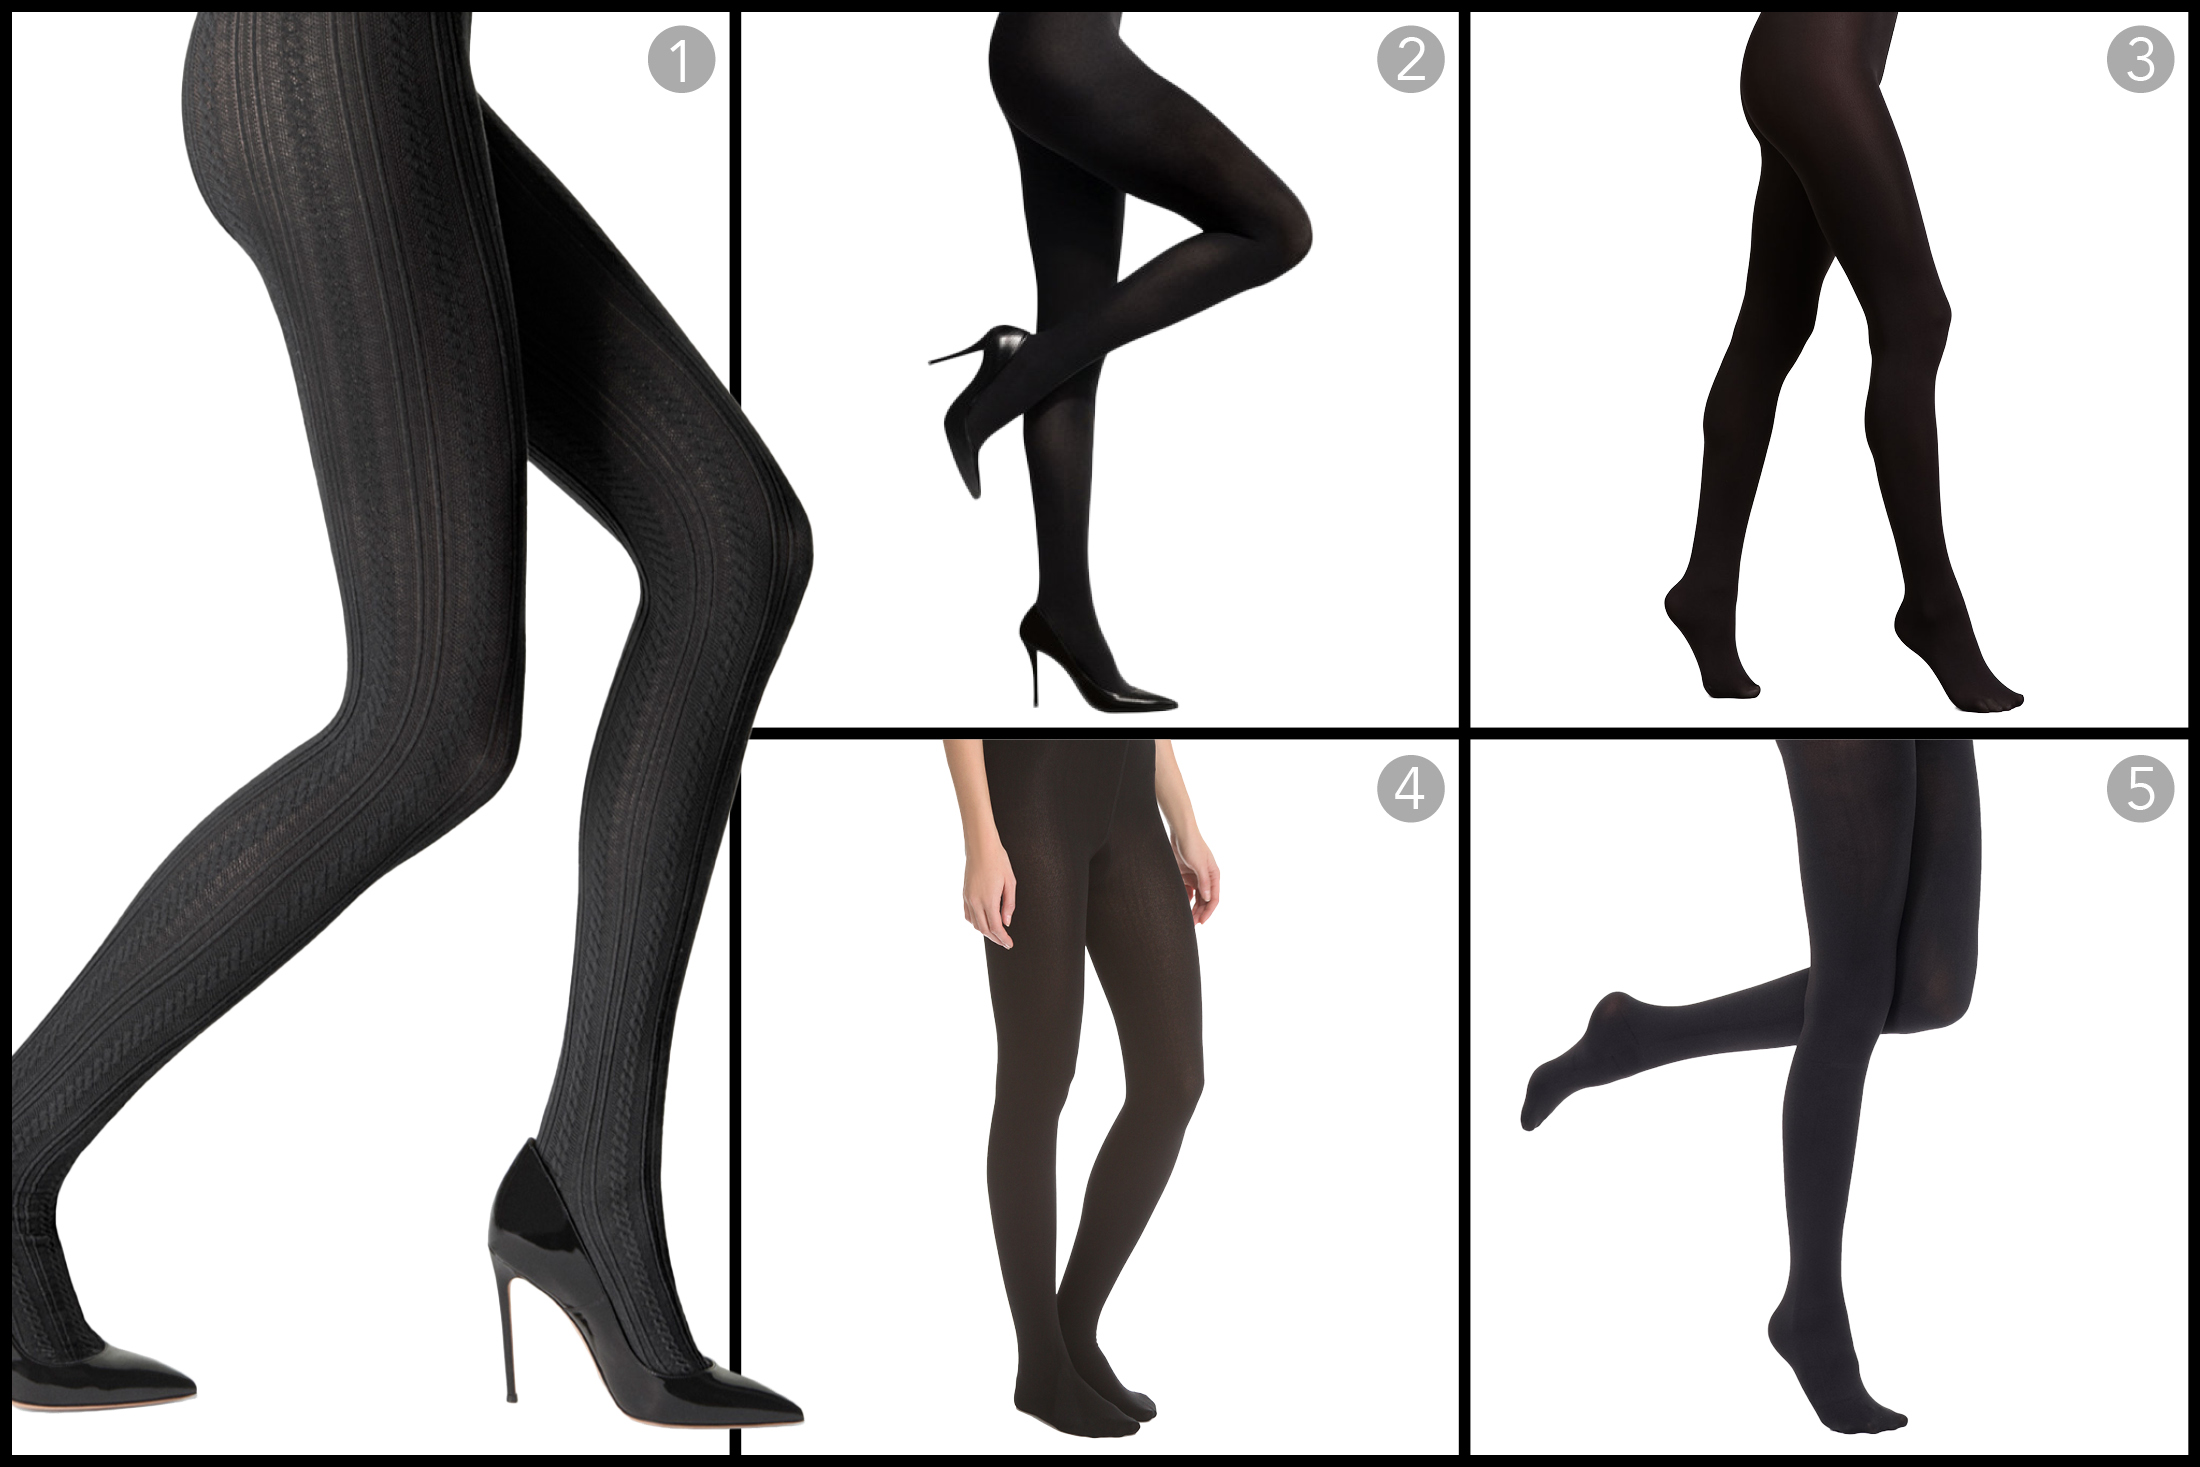 Men in tights: how chaps are reclaiming hosiery, Fashion